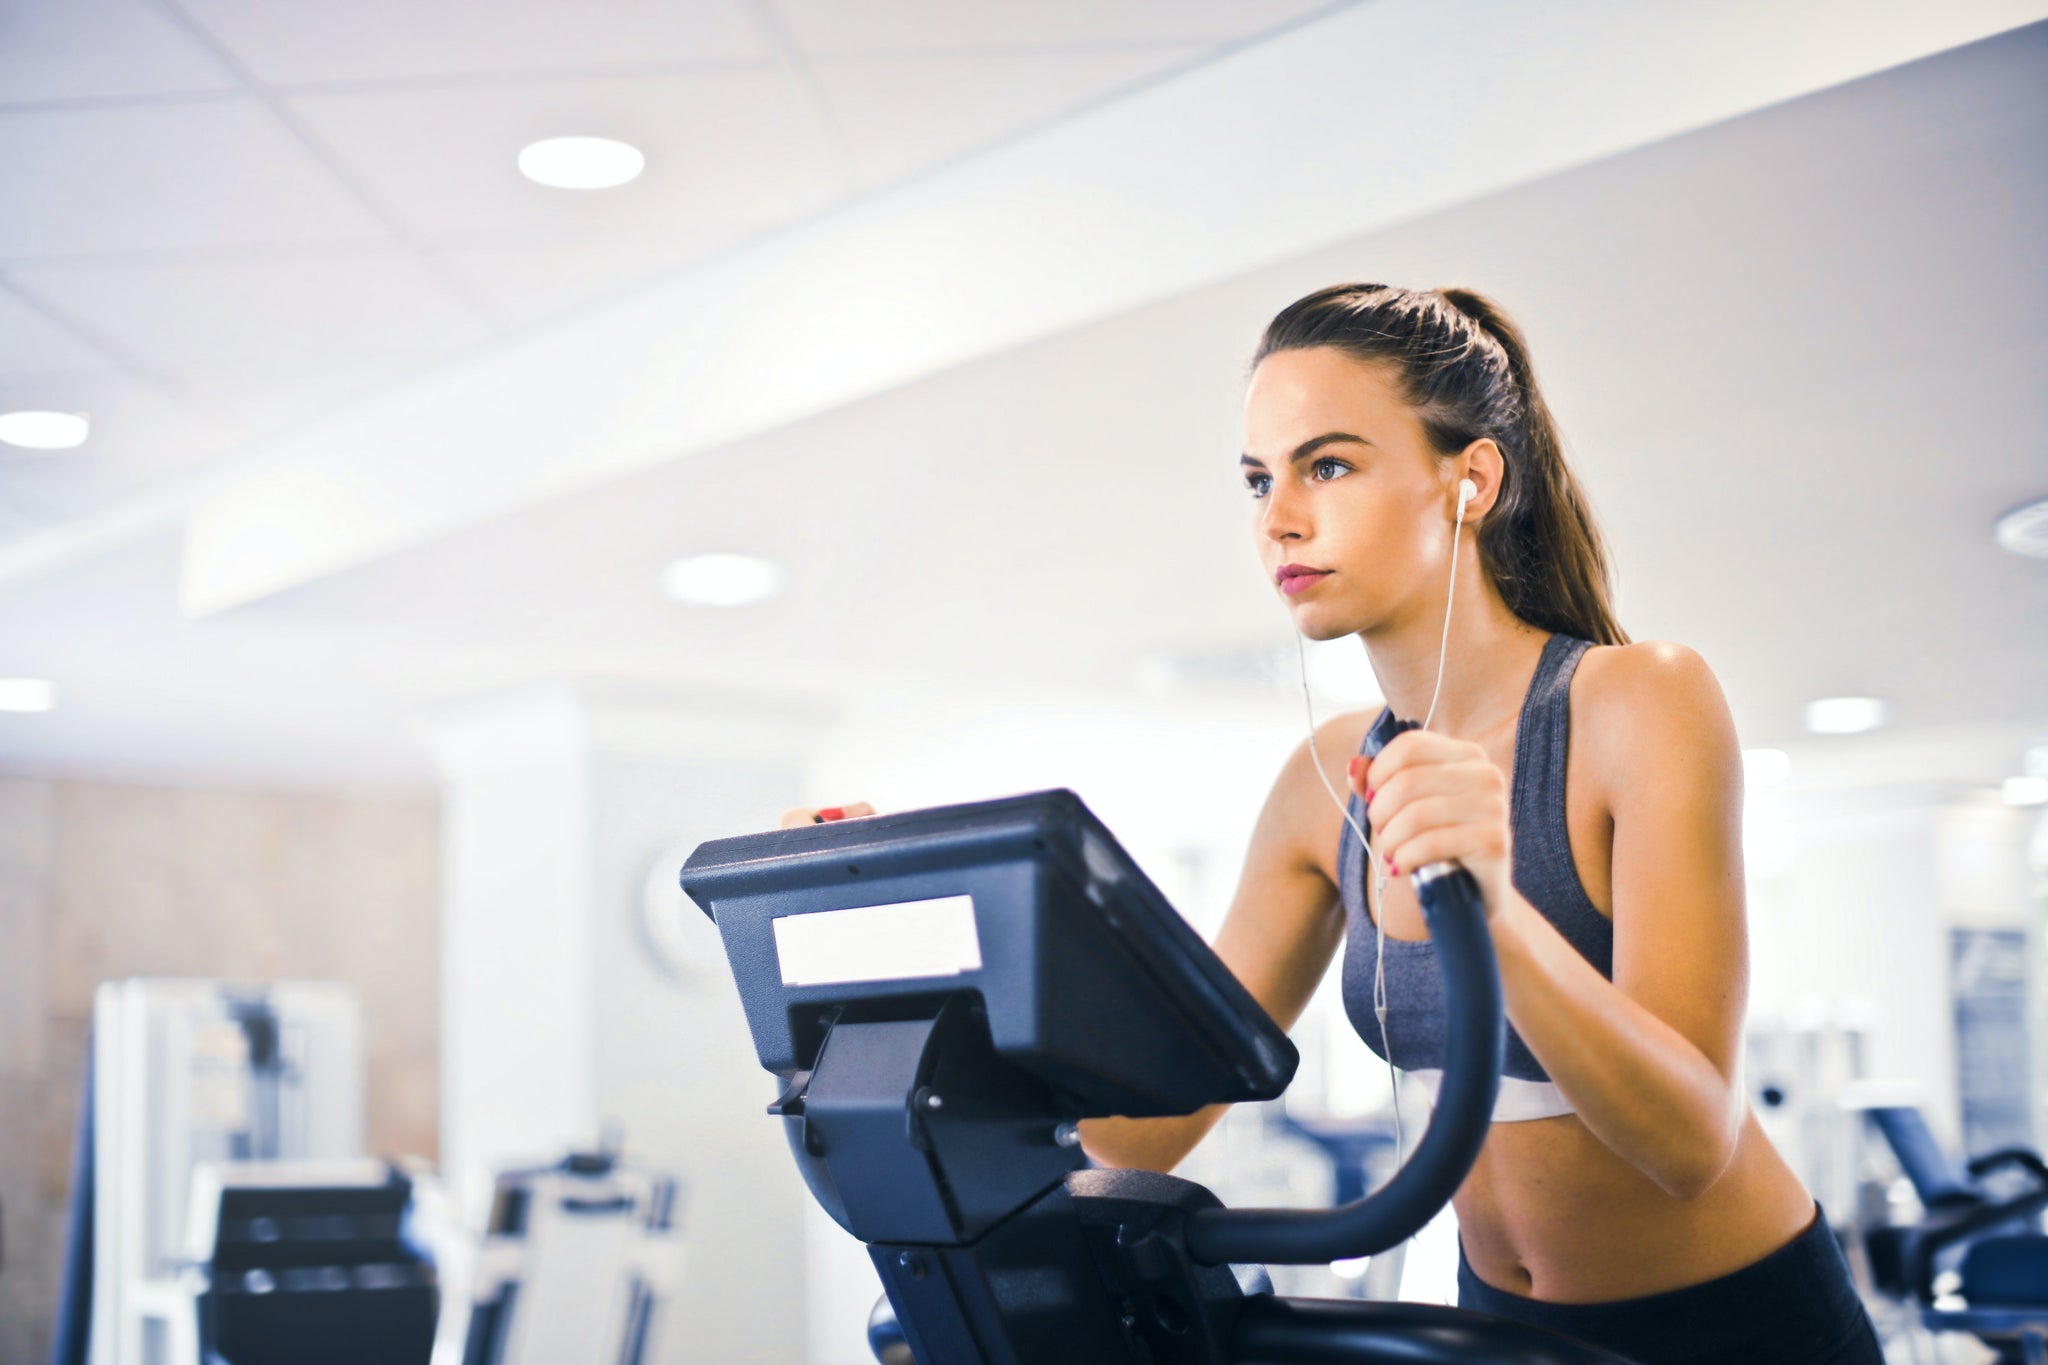 Female athlete tuning in to a podcast on the benefits of collagen peptide protein while running on a treadmill in a modern gym